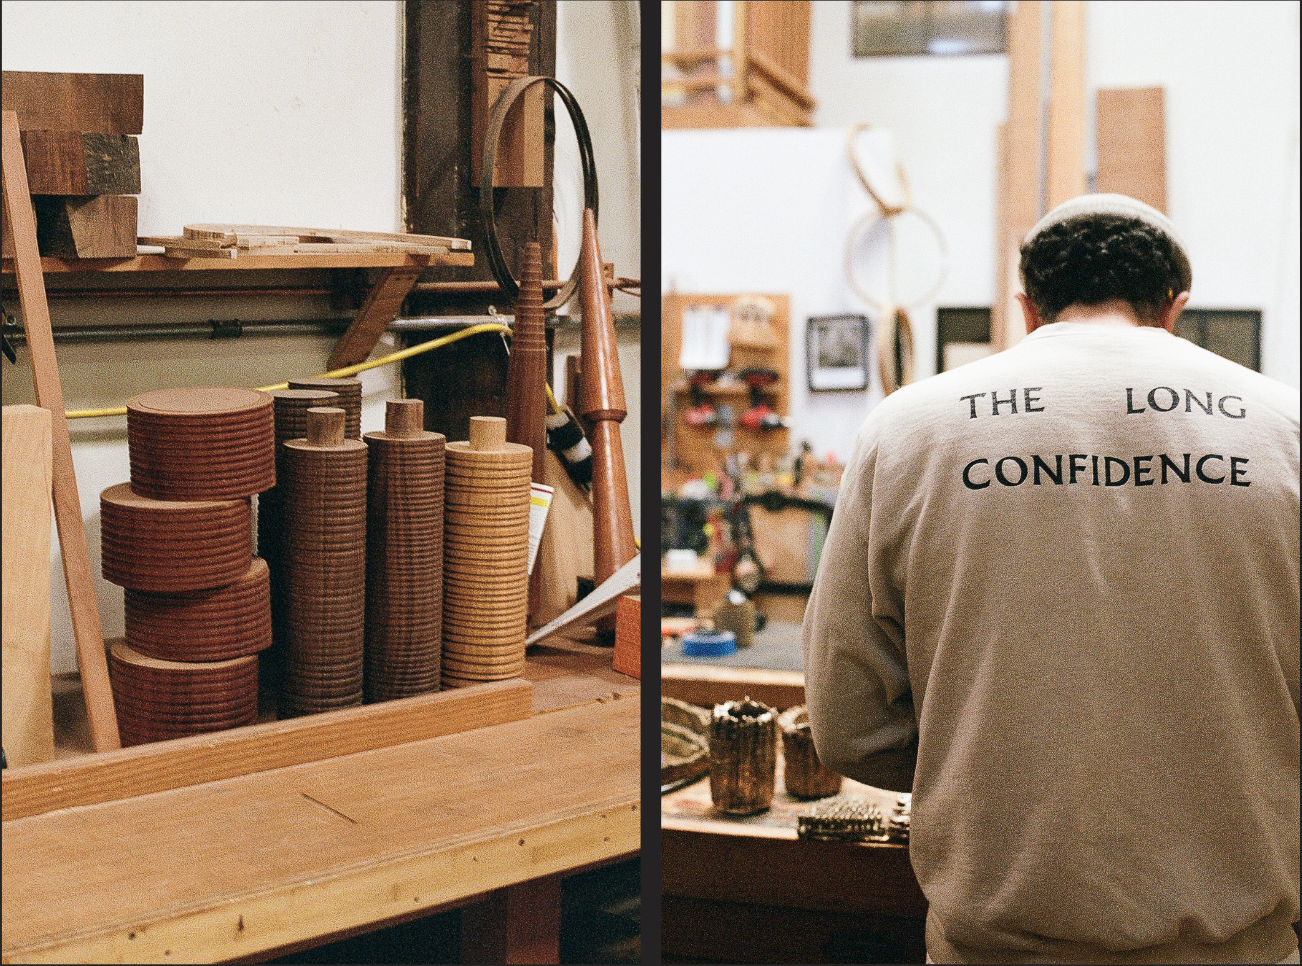 Left: Hand-turned wood parts in The Long Confidence’s Berkeley studio. Right: Founder Rafi Ajl polishes a work in progress.